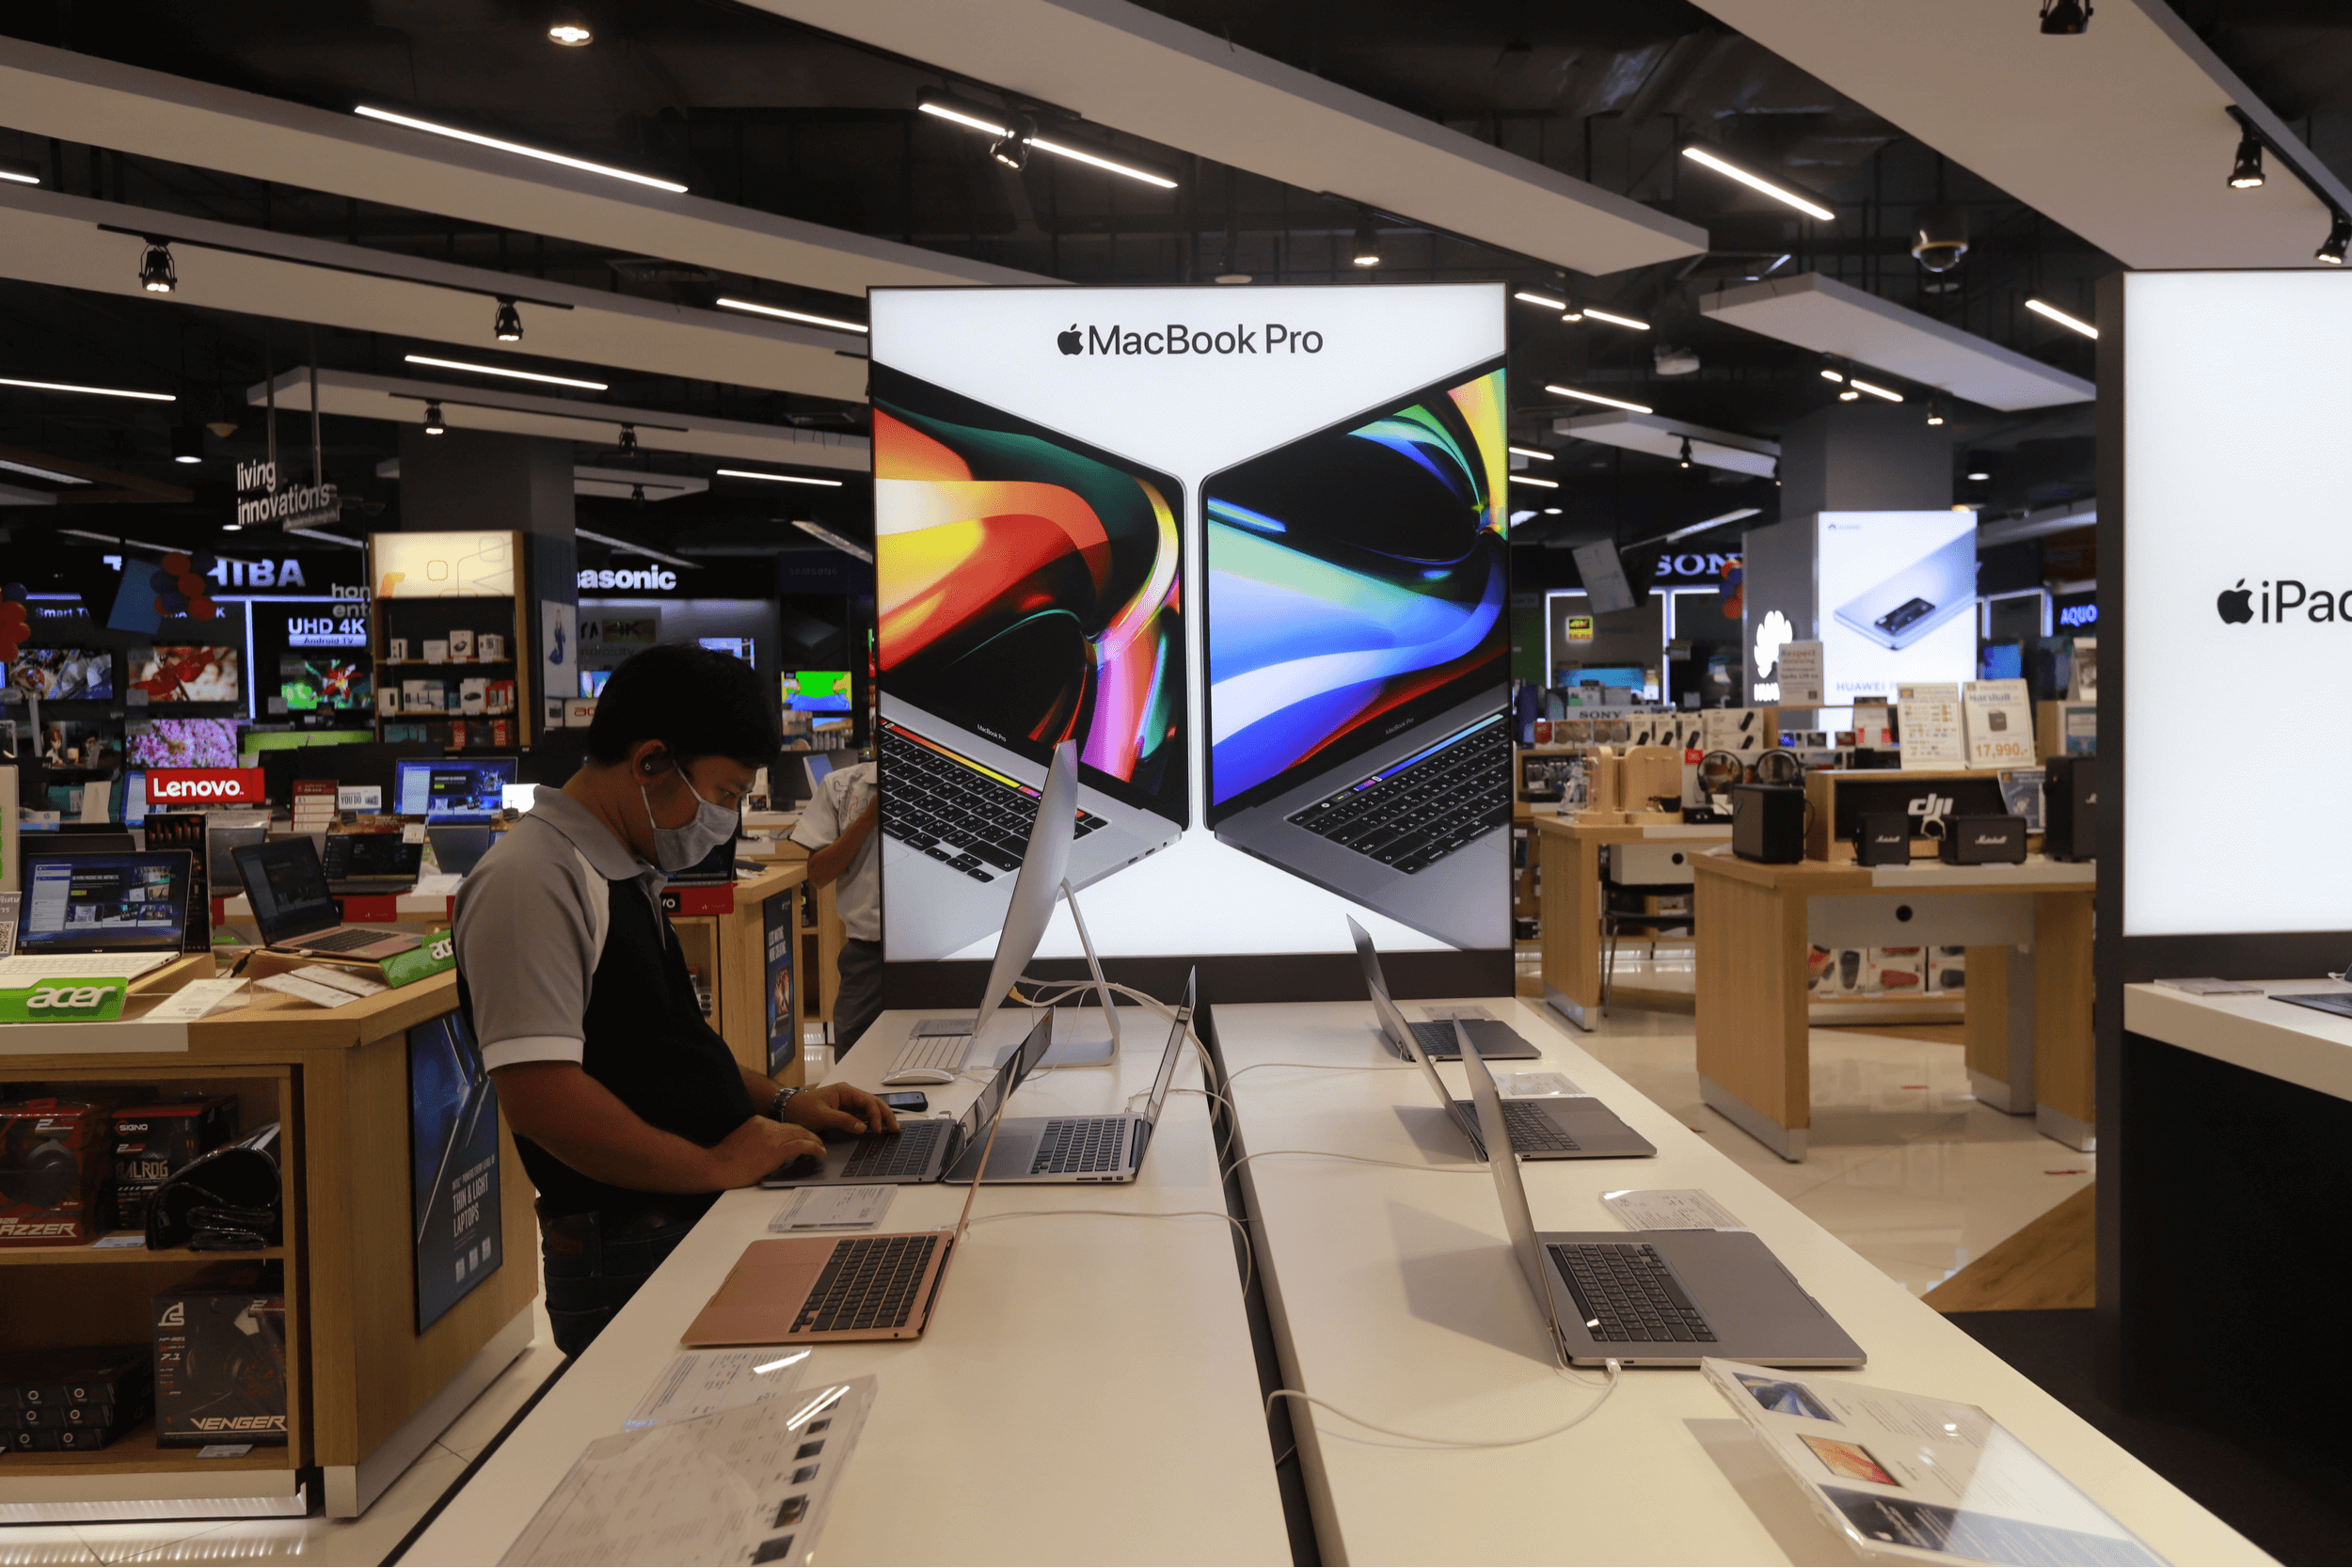 Studio7 shop in Central Plaza KhonKaen sales Macbook, iPhone, iMac, iPadpro, speakerphone for Apple products It is a premium reseller of Apple Inc in Thailand.